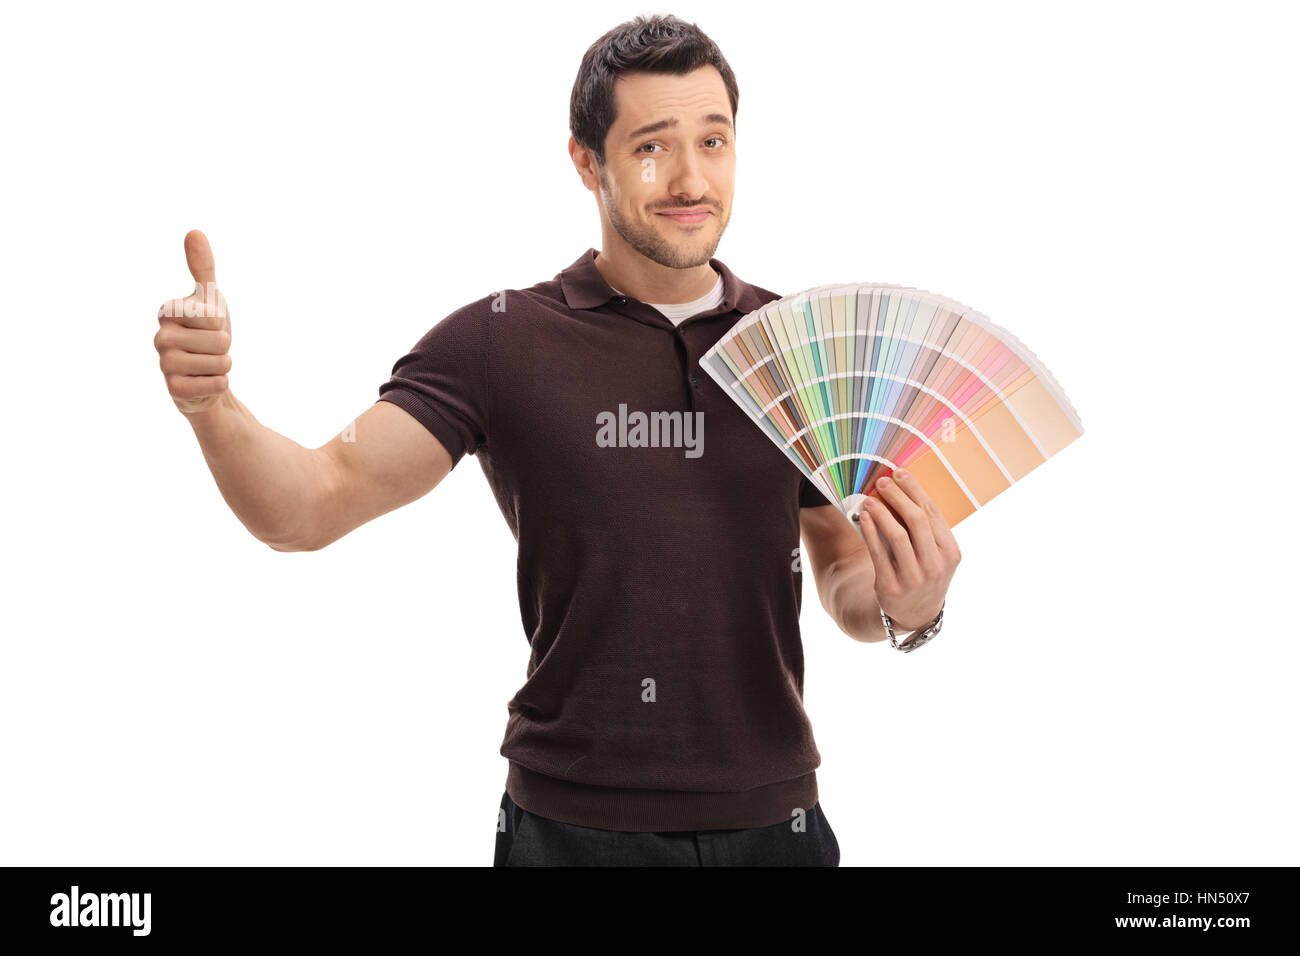 Man holding a color swatch and making a thumb up sign isolated on white background Stock Photo